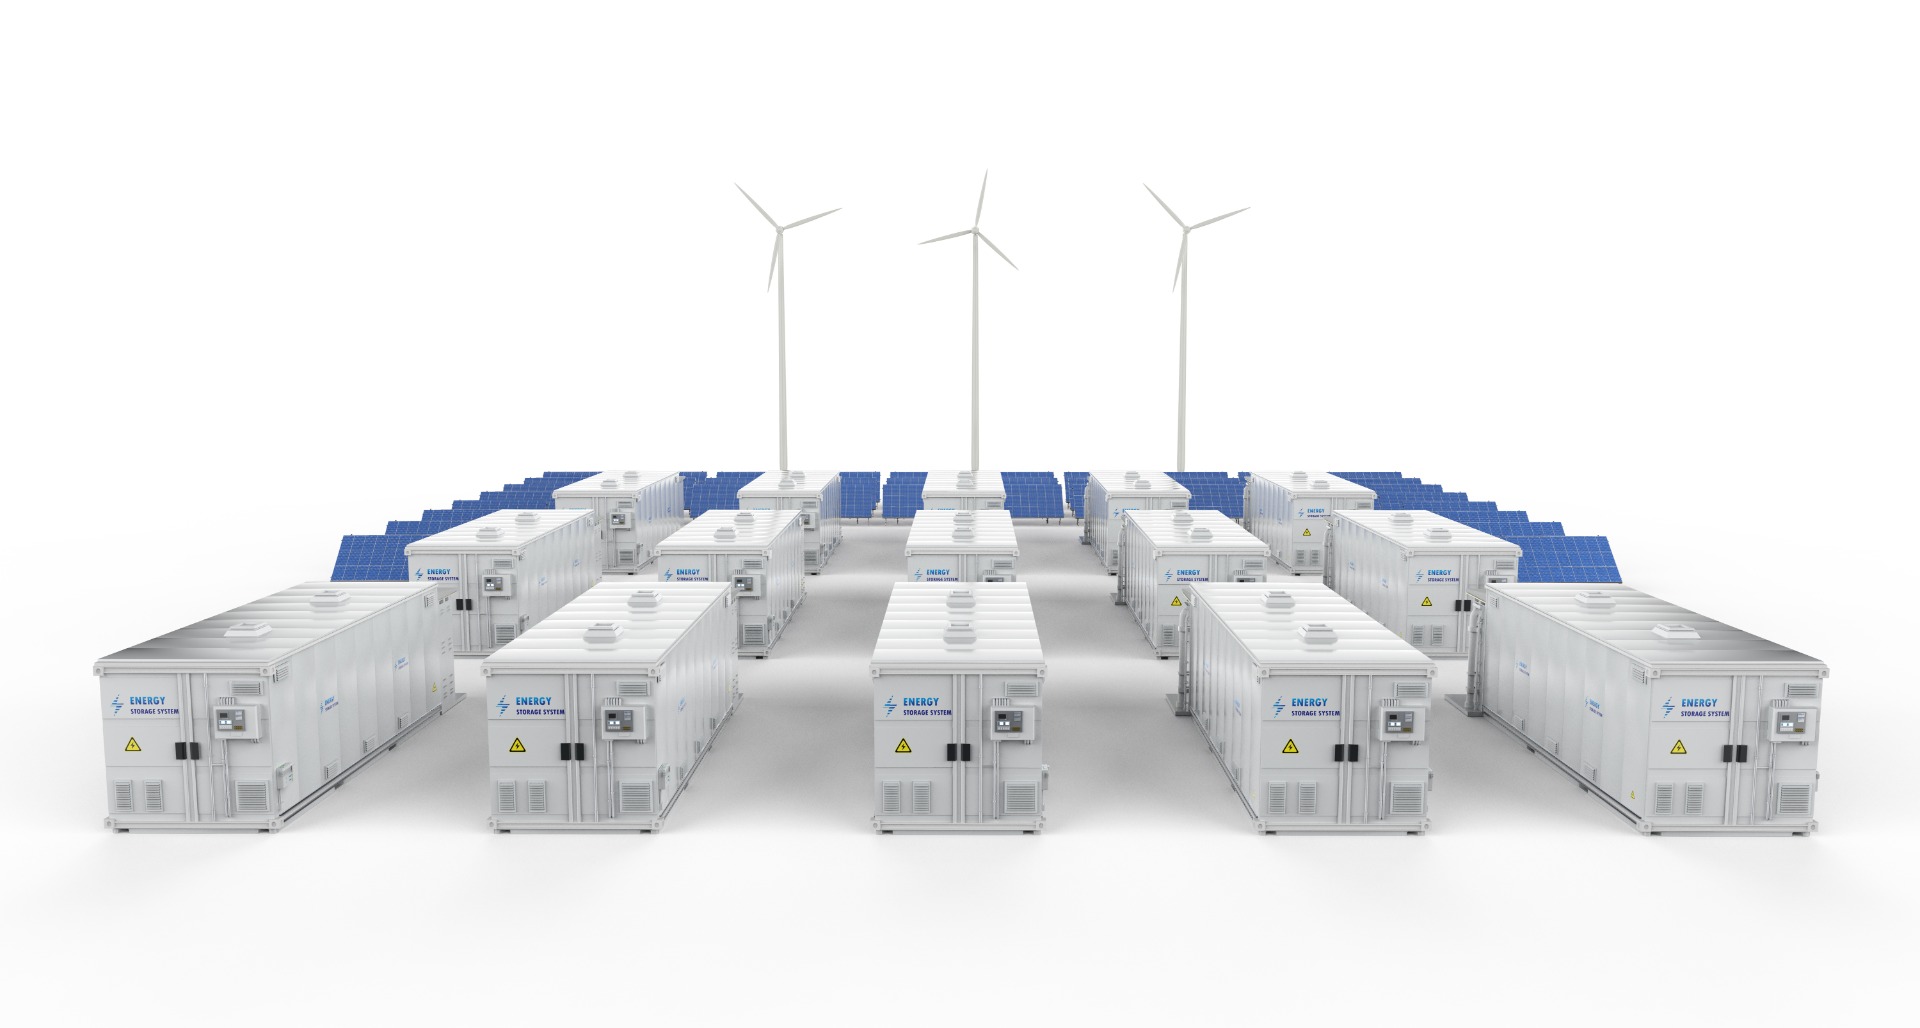 amount-energy-storage-systems-battery-container-units-with-solar-turbine-farm_20231011_16969909303713210